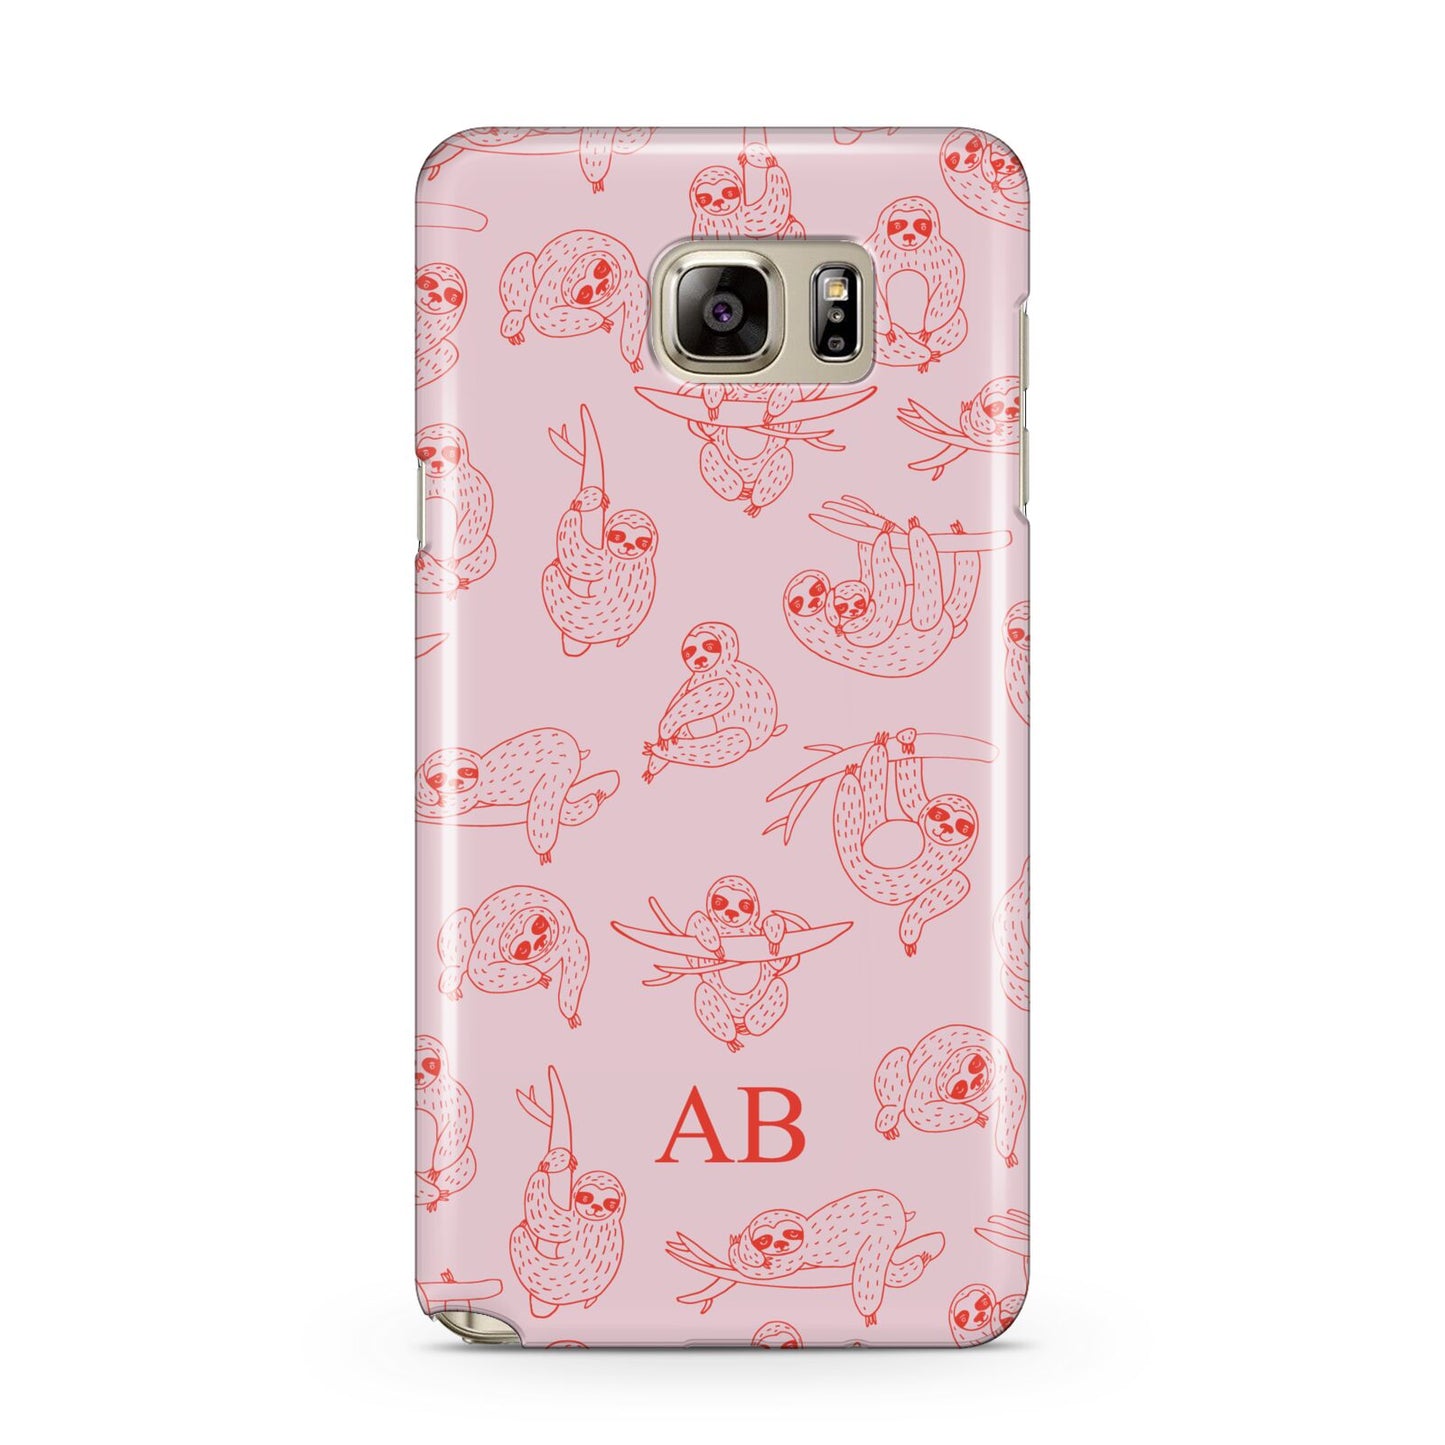 Customised Sloth Samsung Galaxy Note 5 Case